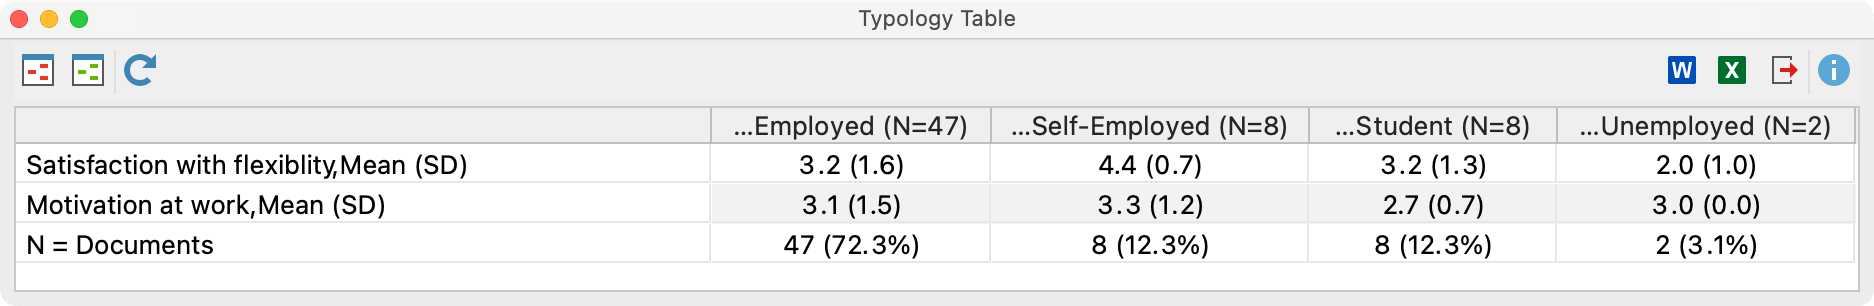 Example of a Typology Table